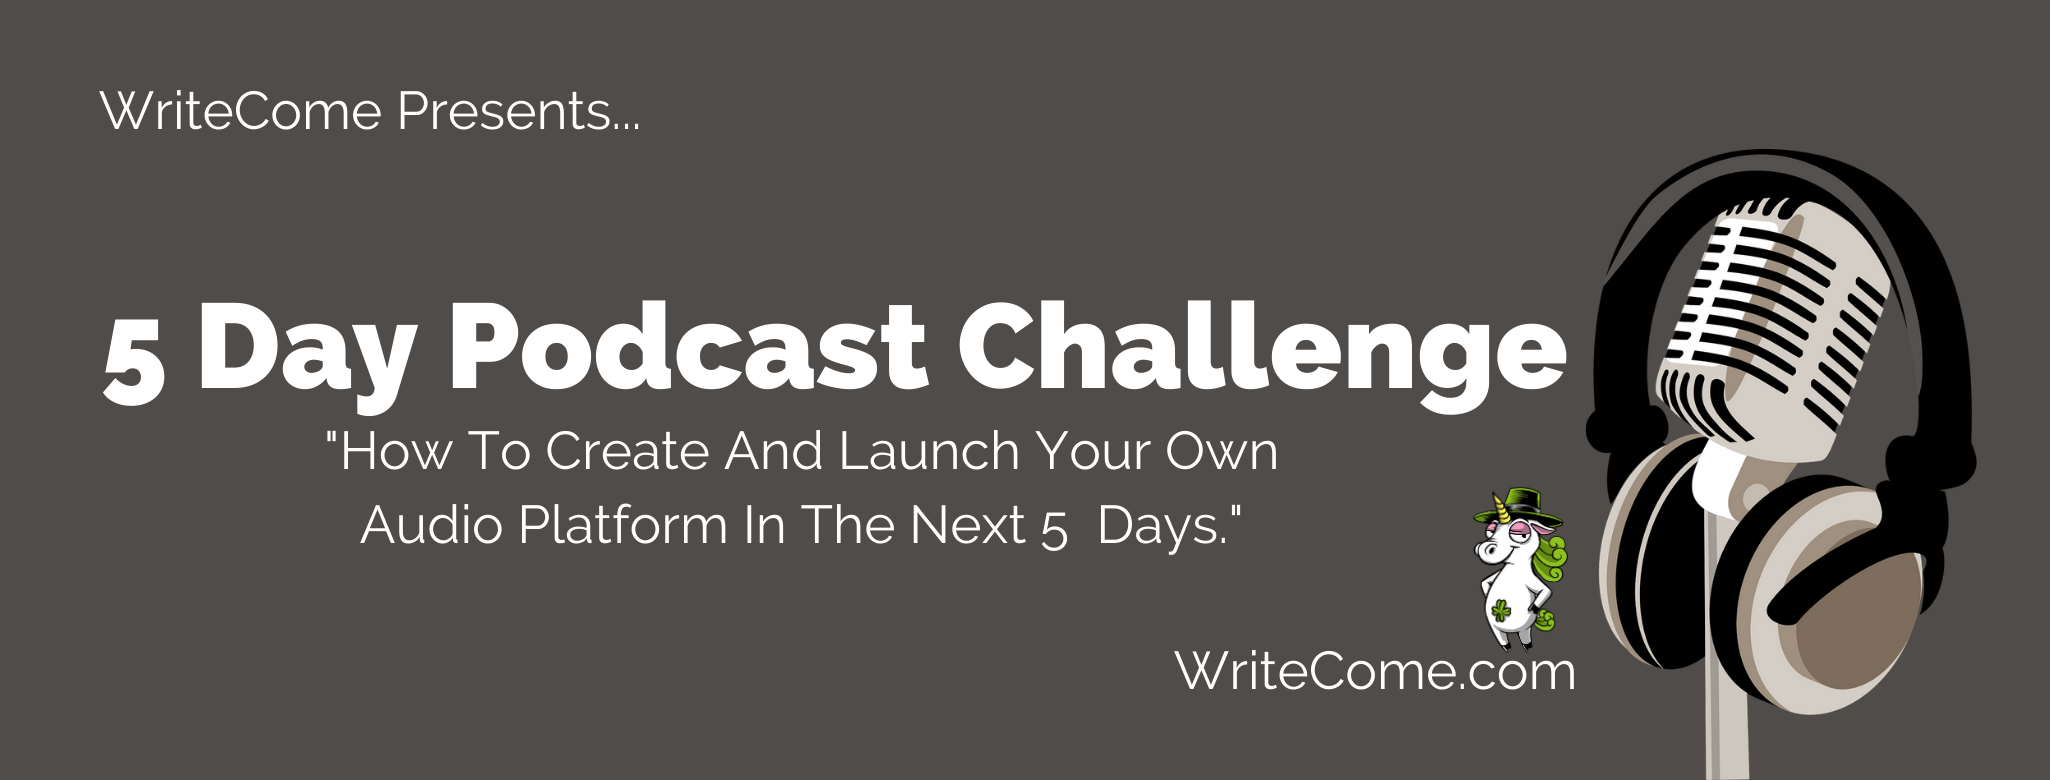 5 Day Podcast Challenge